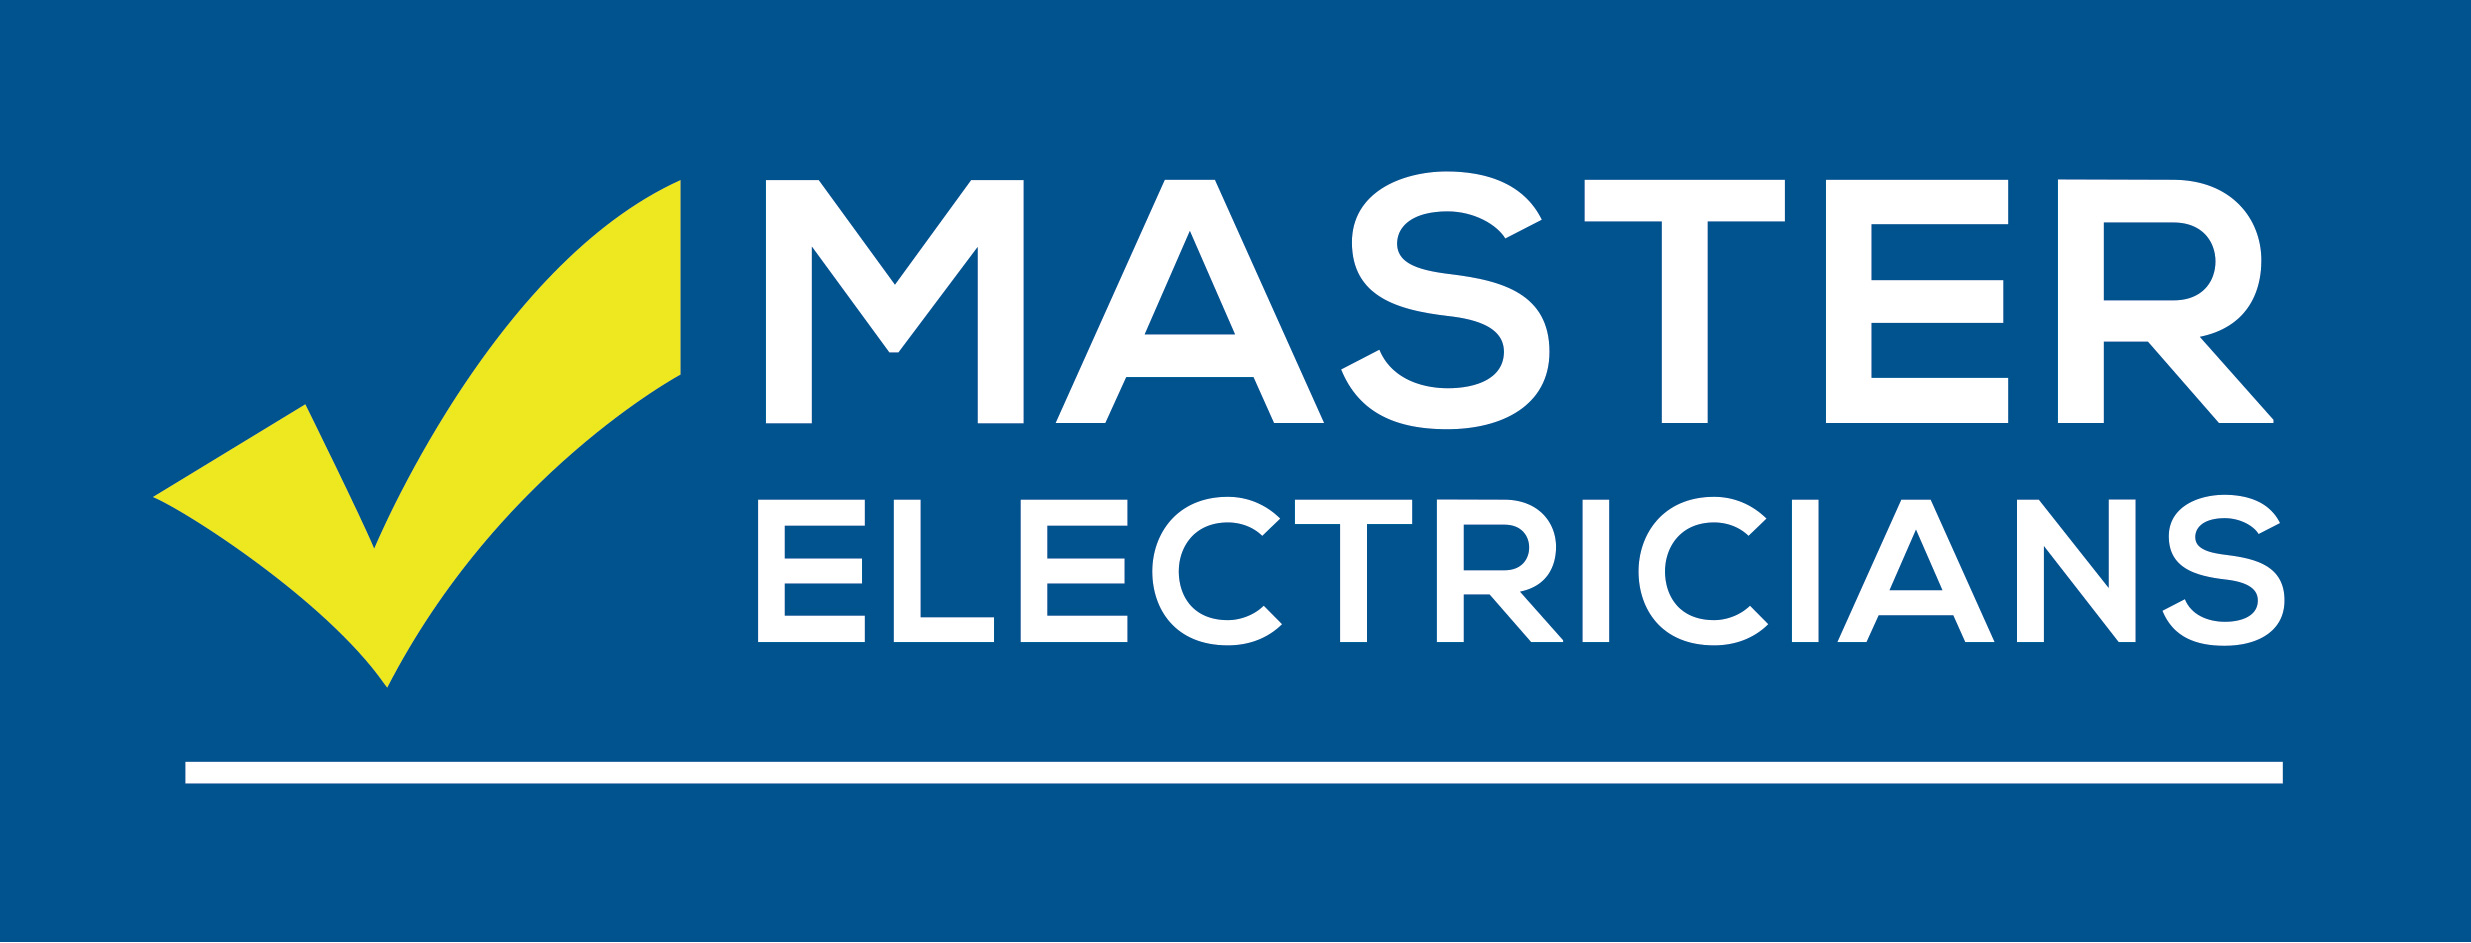 Master Electricians